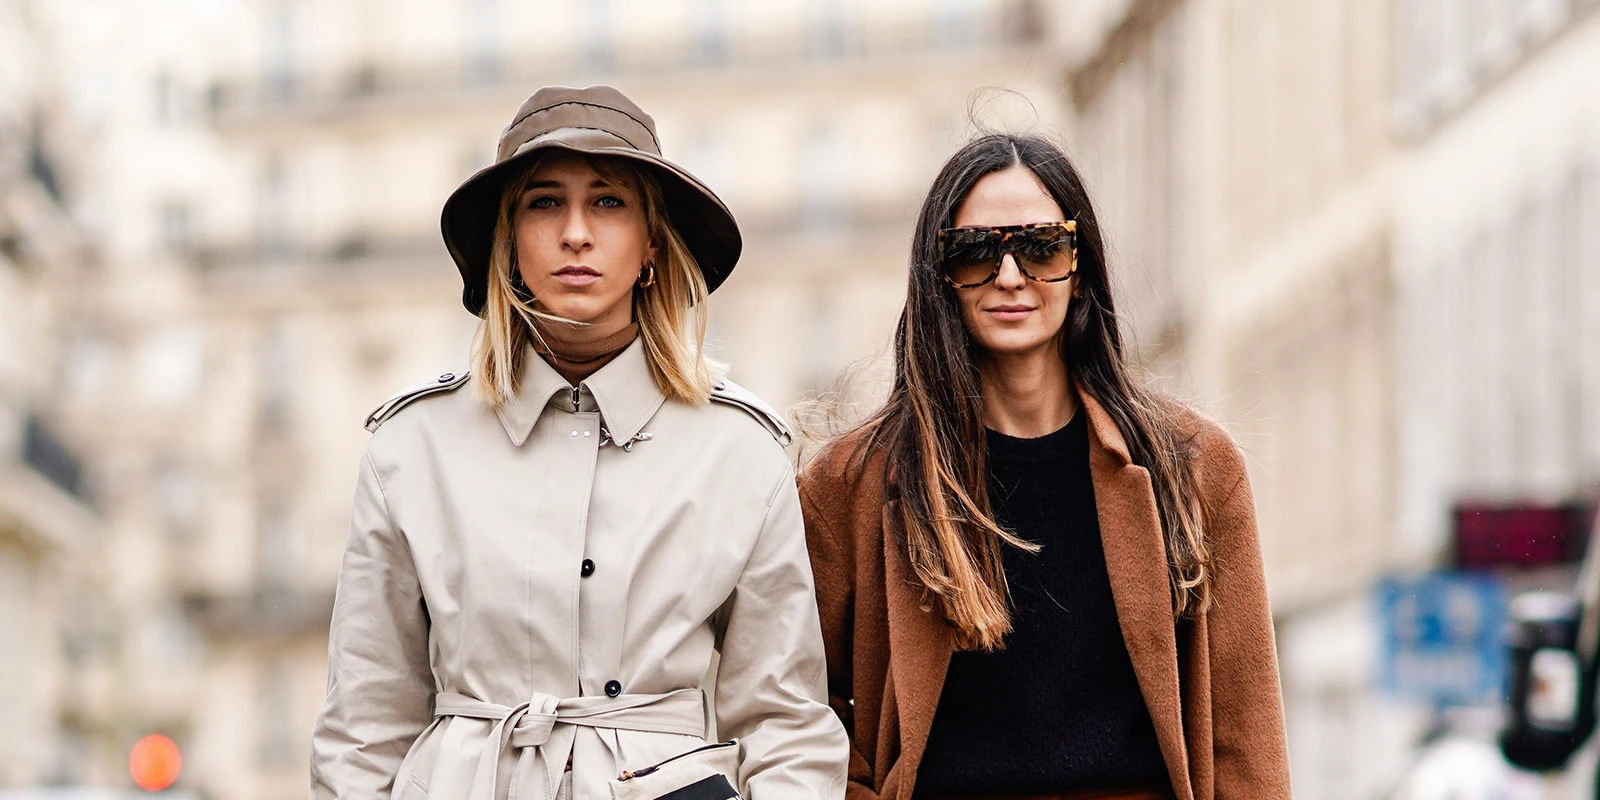 Make a statement in an all-neutral outfit | Stylight